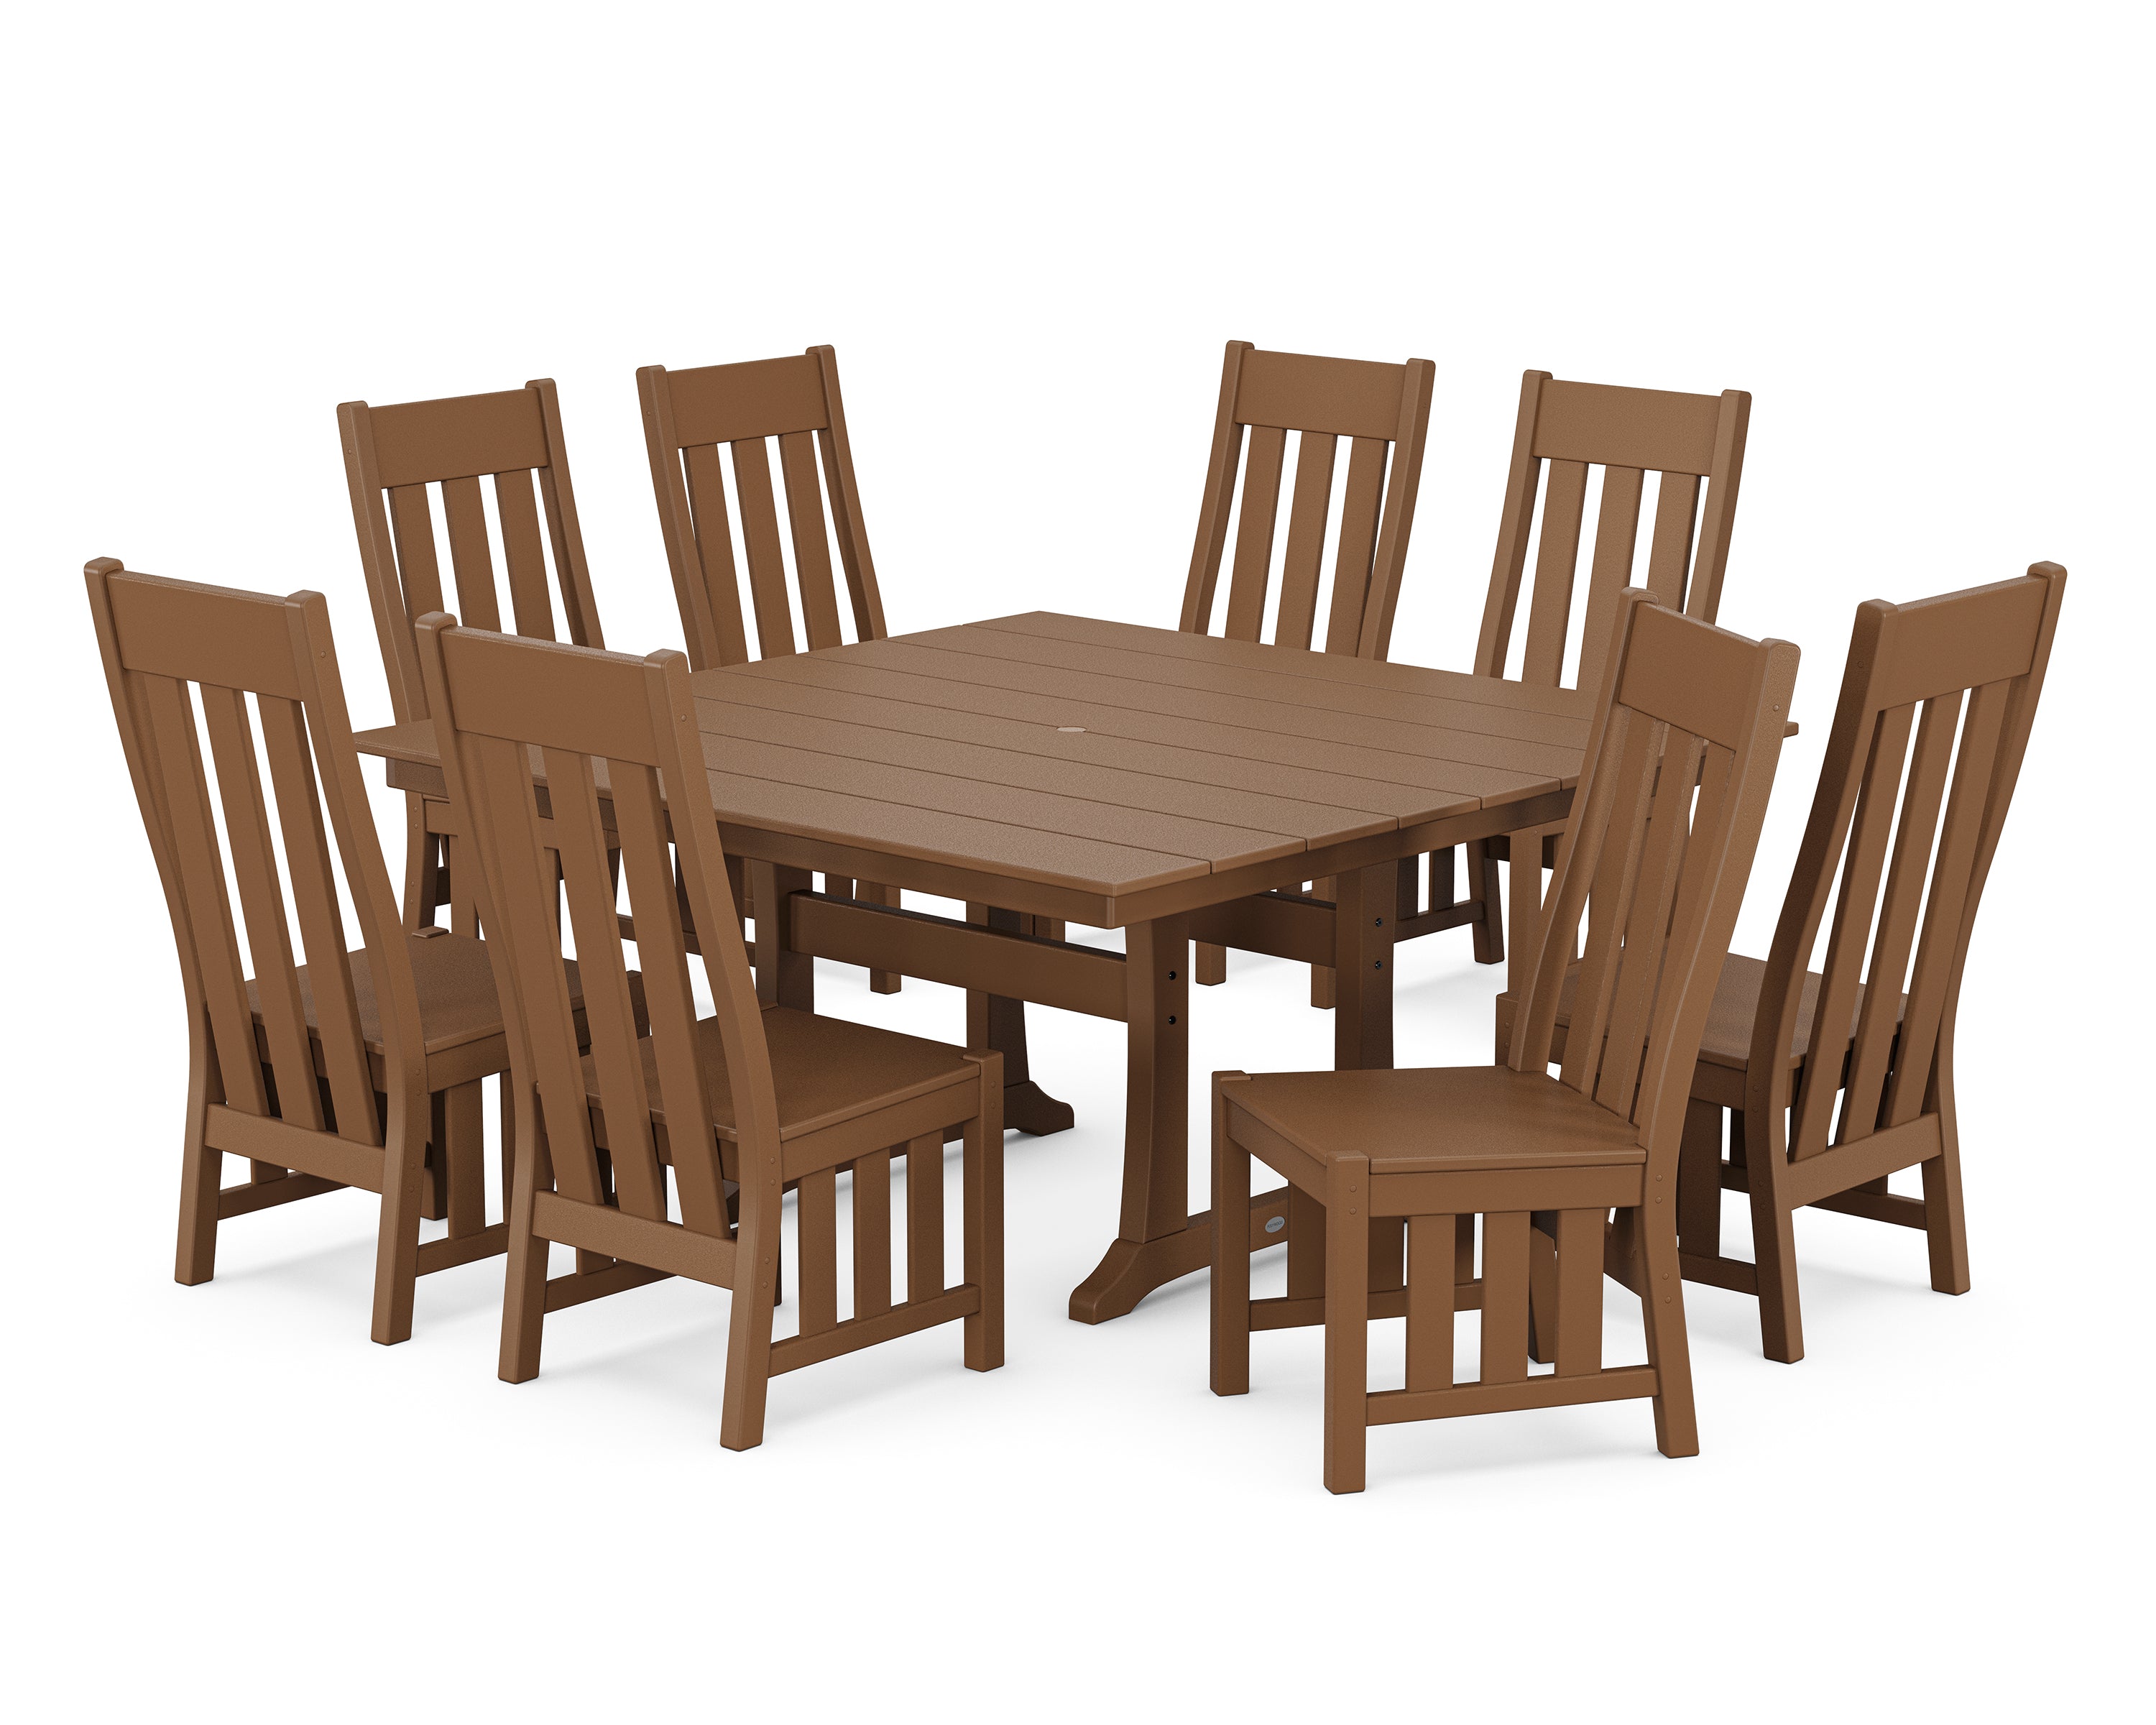 Martha Stewart by POLYWOOD® Acadia Side Chair 9-Piece Square Farmhouse Dining Set with Trestle Legs in Teak